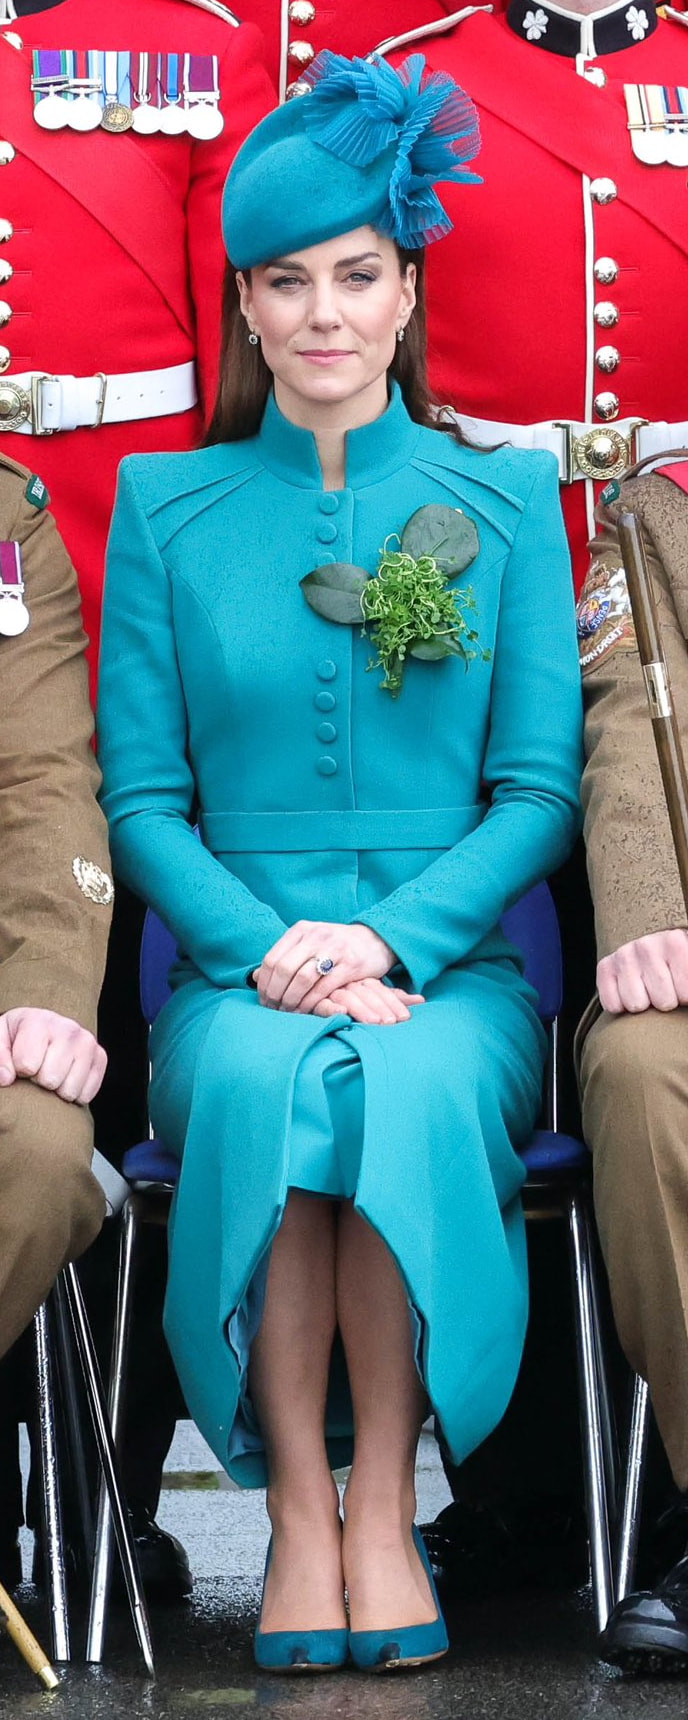 Sean Barrett Felt Saucer Hat in Navy as seen on Kate Middleton, Princess of Wales.